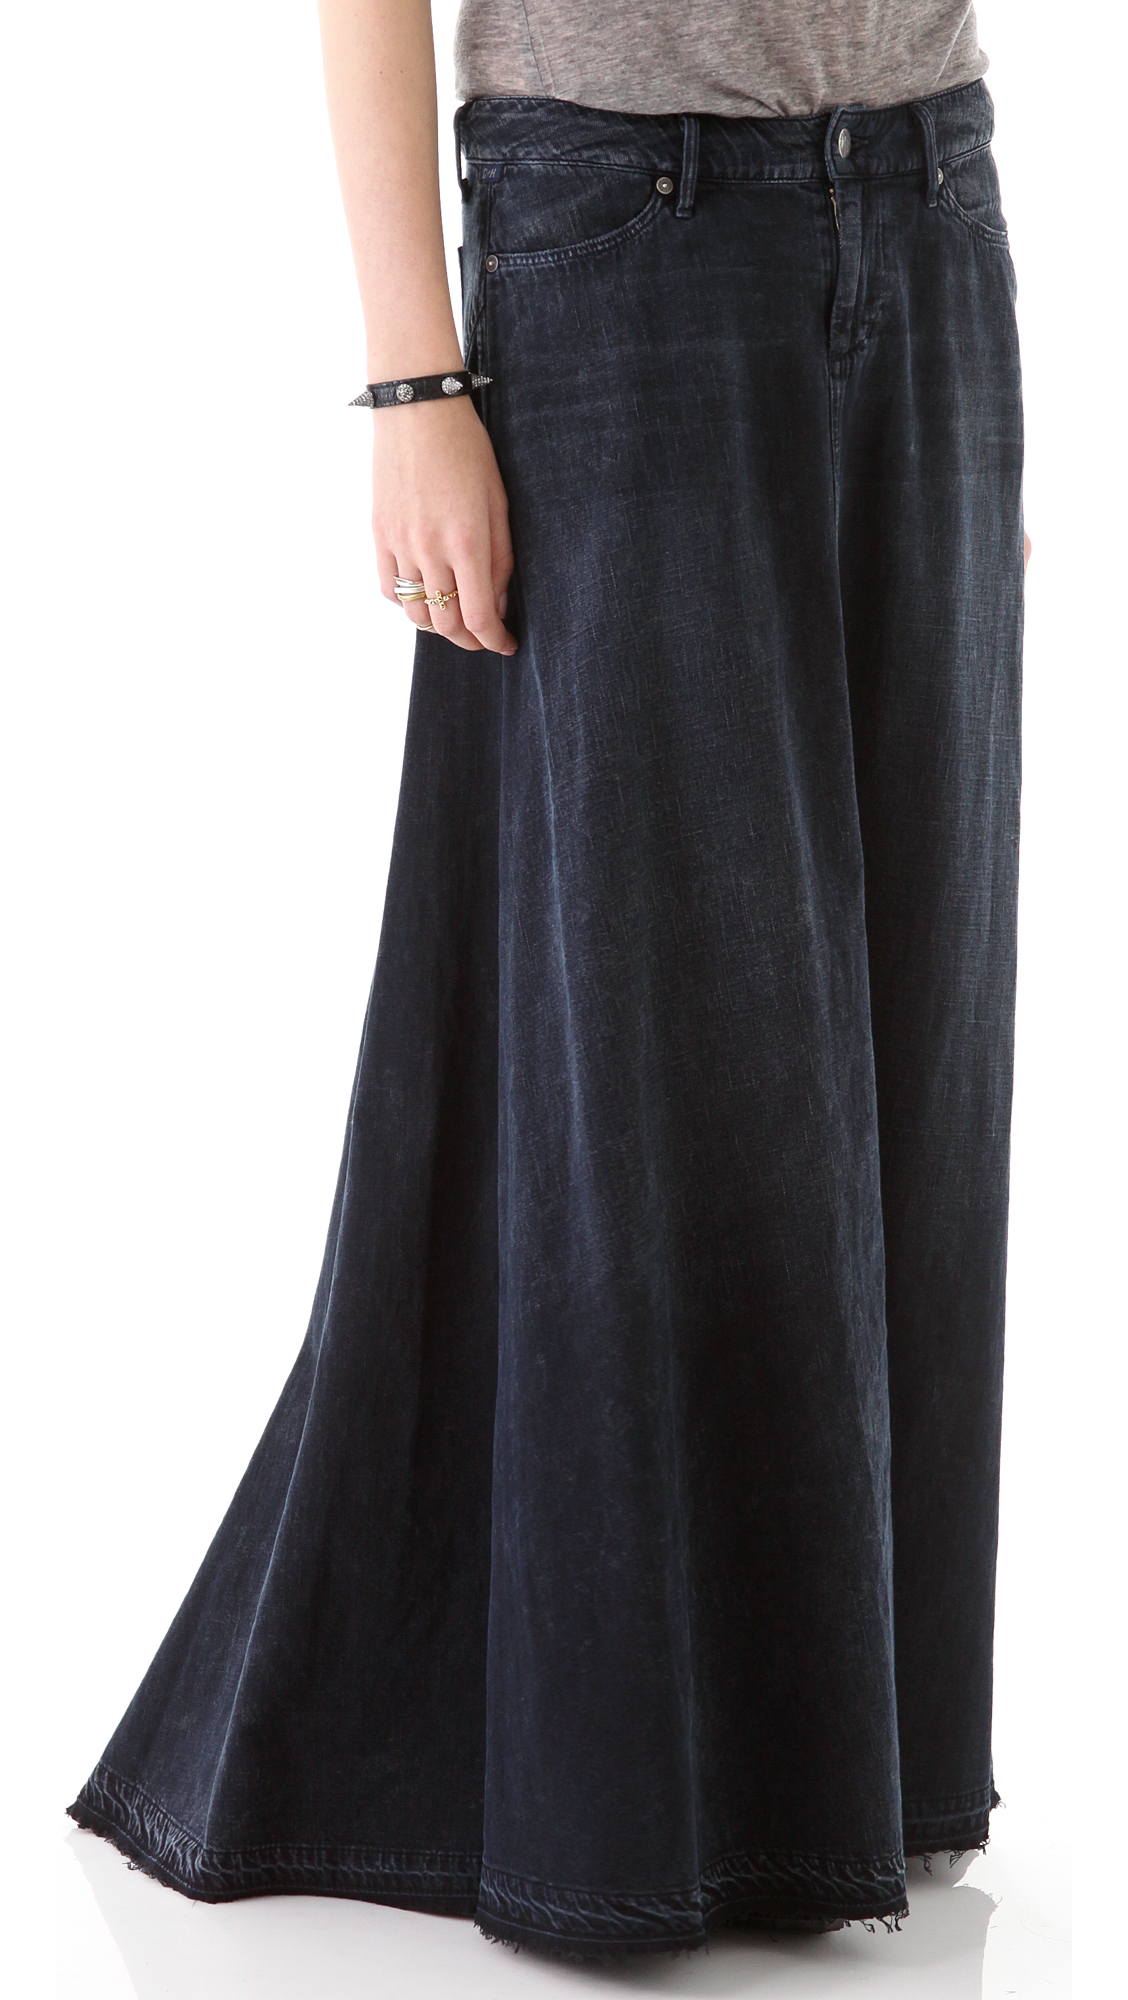 Citizens of Humanity Anja Maxi Skirt in Black - Lyst